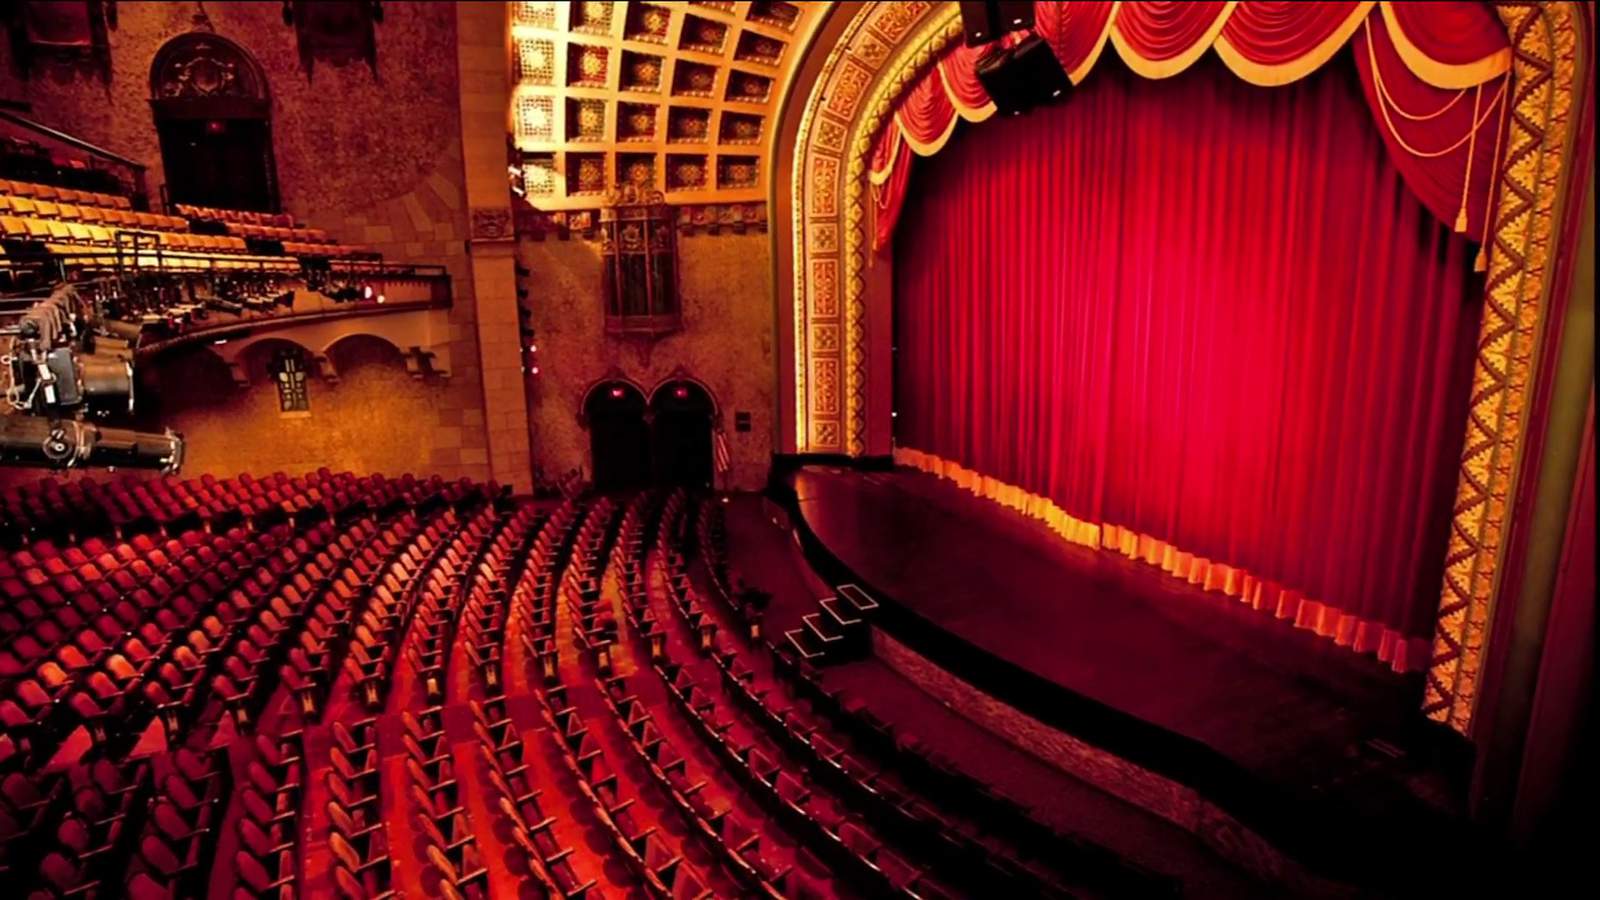 As funding runs out, Florida Theatre launches campaign to reopen in December